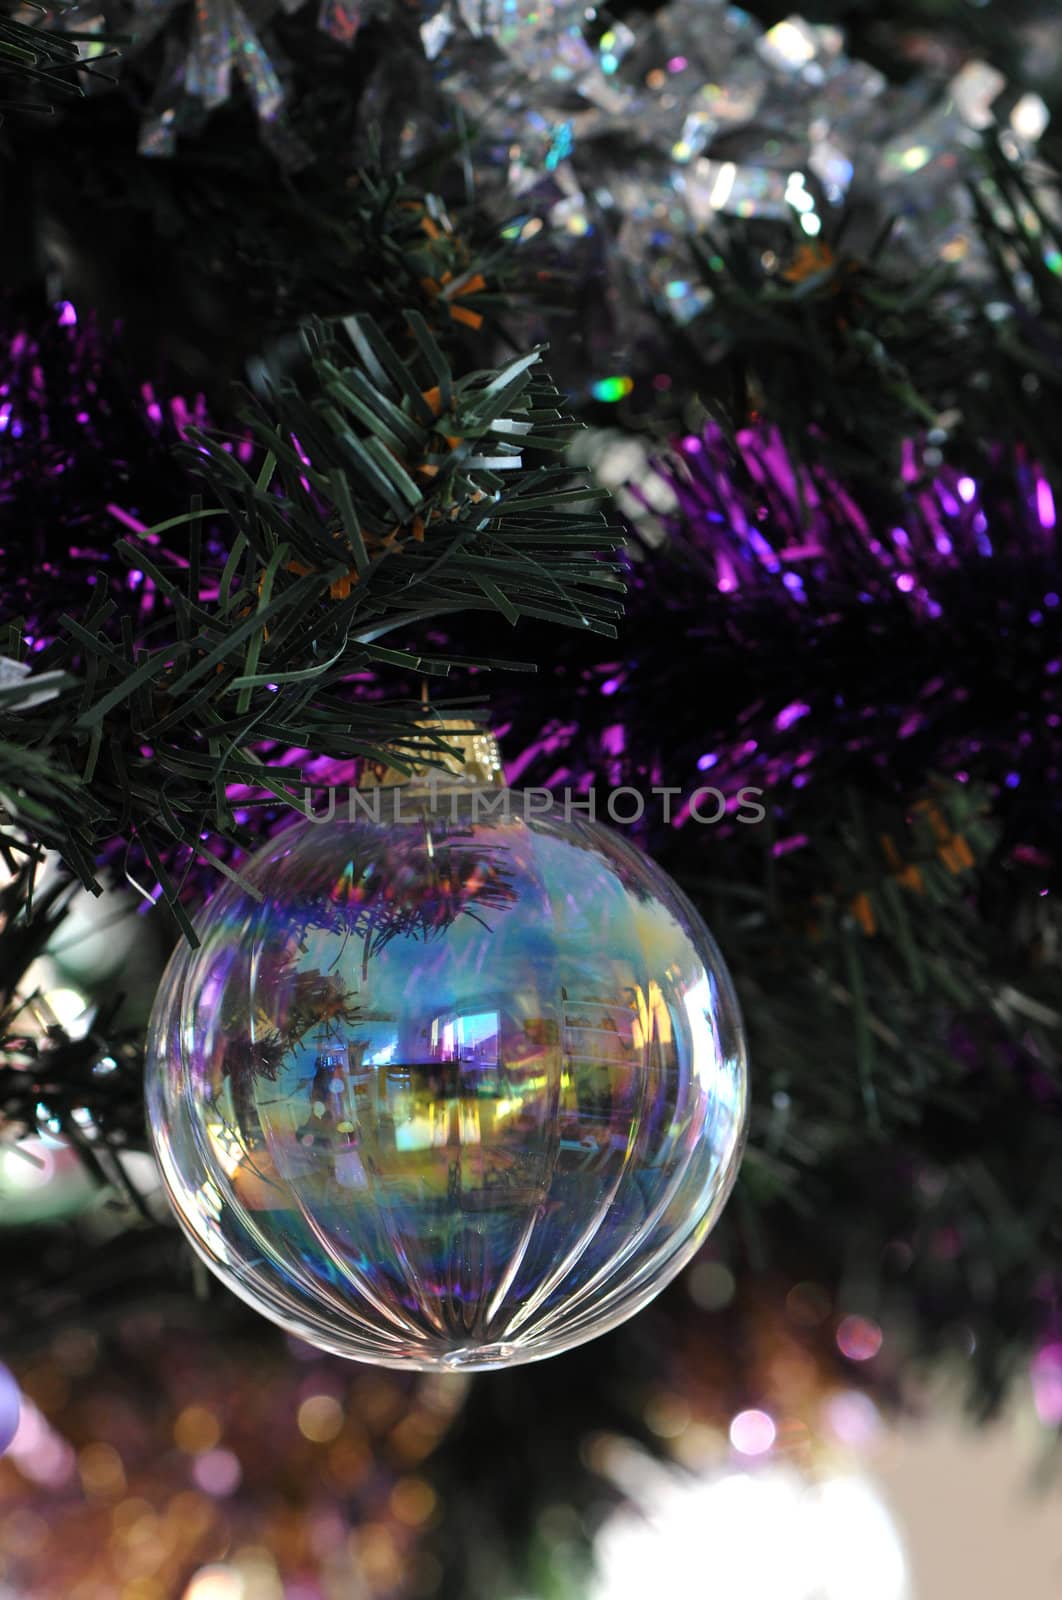 Transparent Christmas Ball in a Plastic Pine by shkyo30